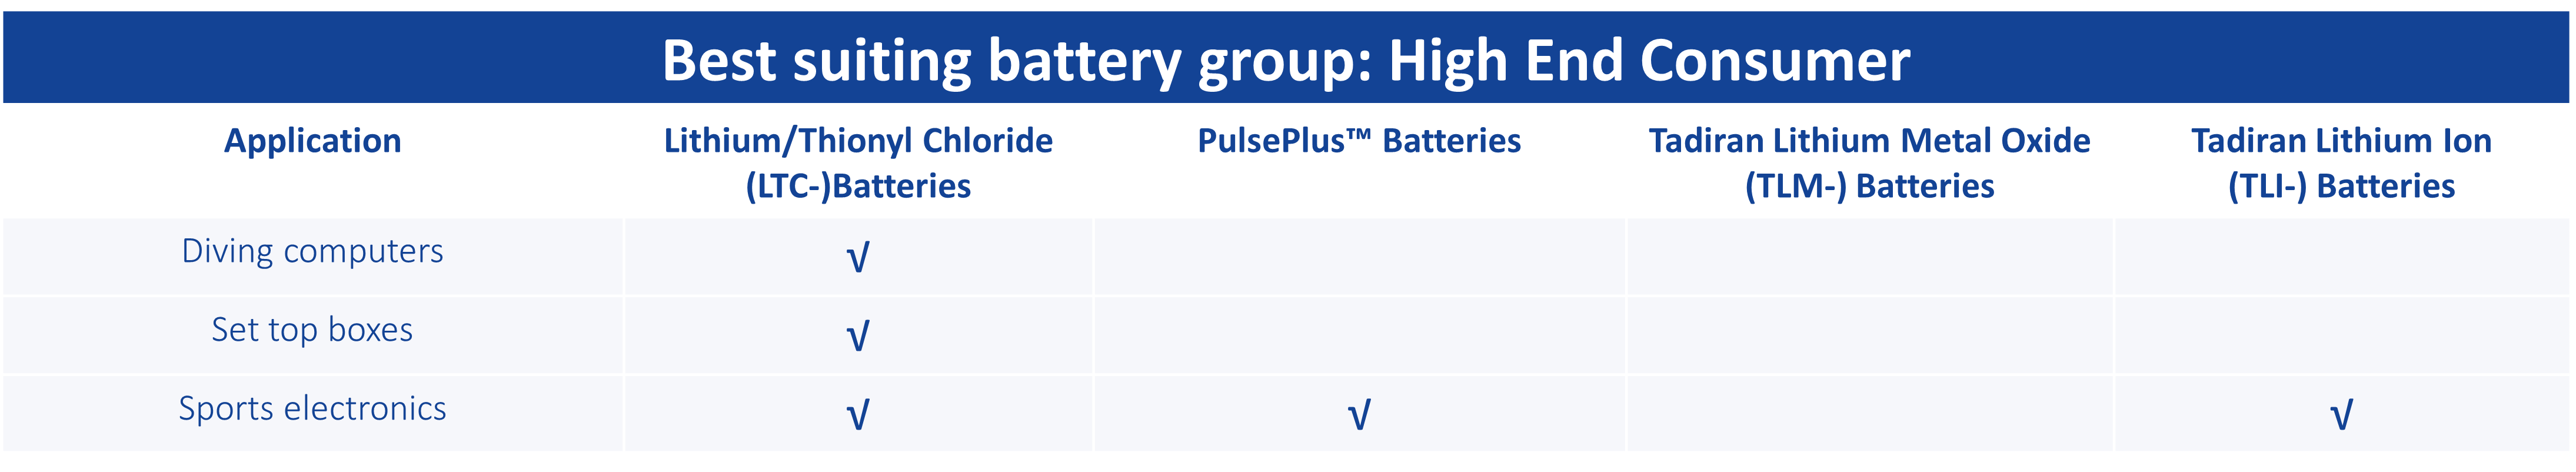 Batteries for High End Consumer applications